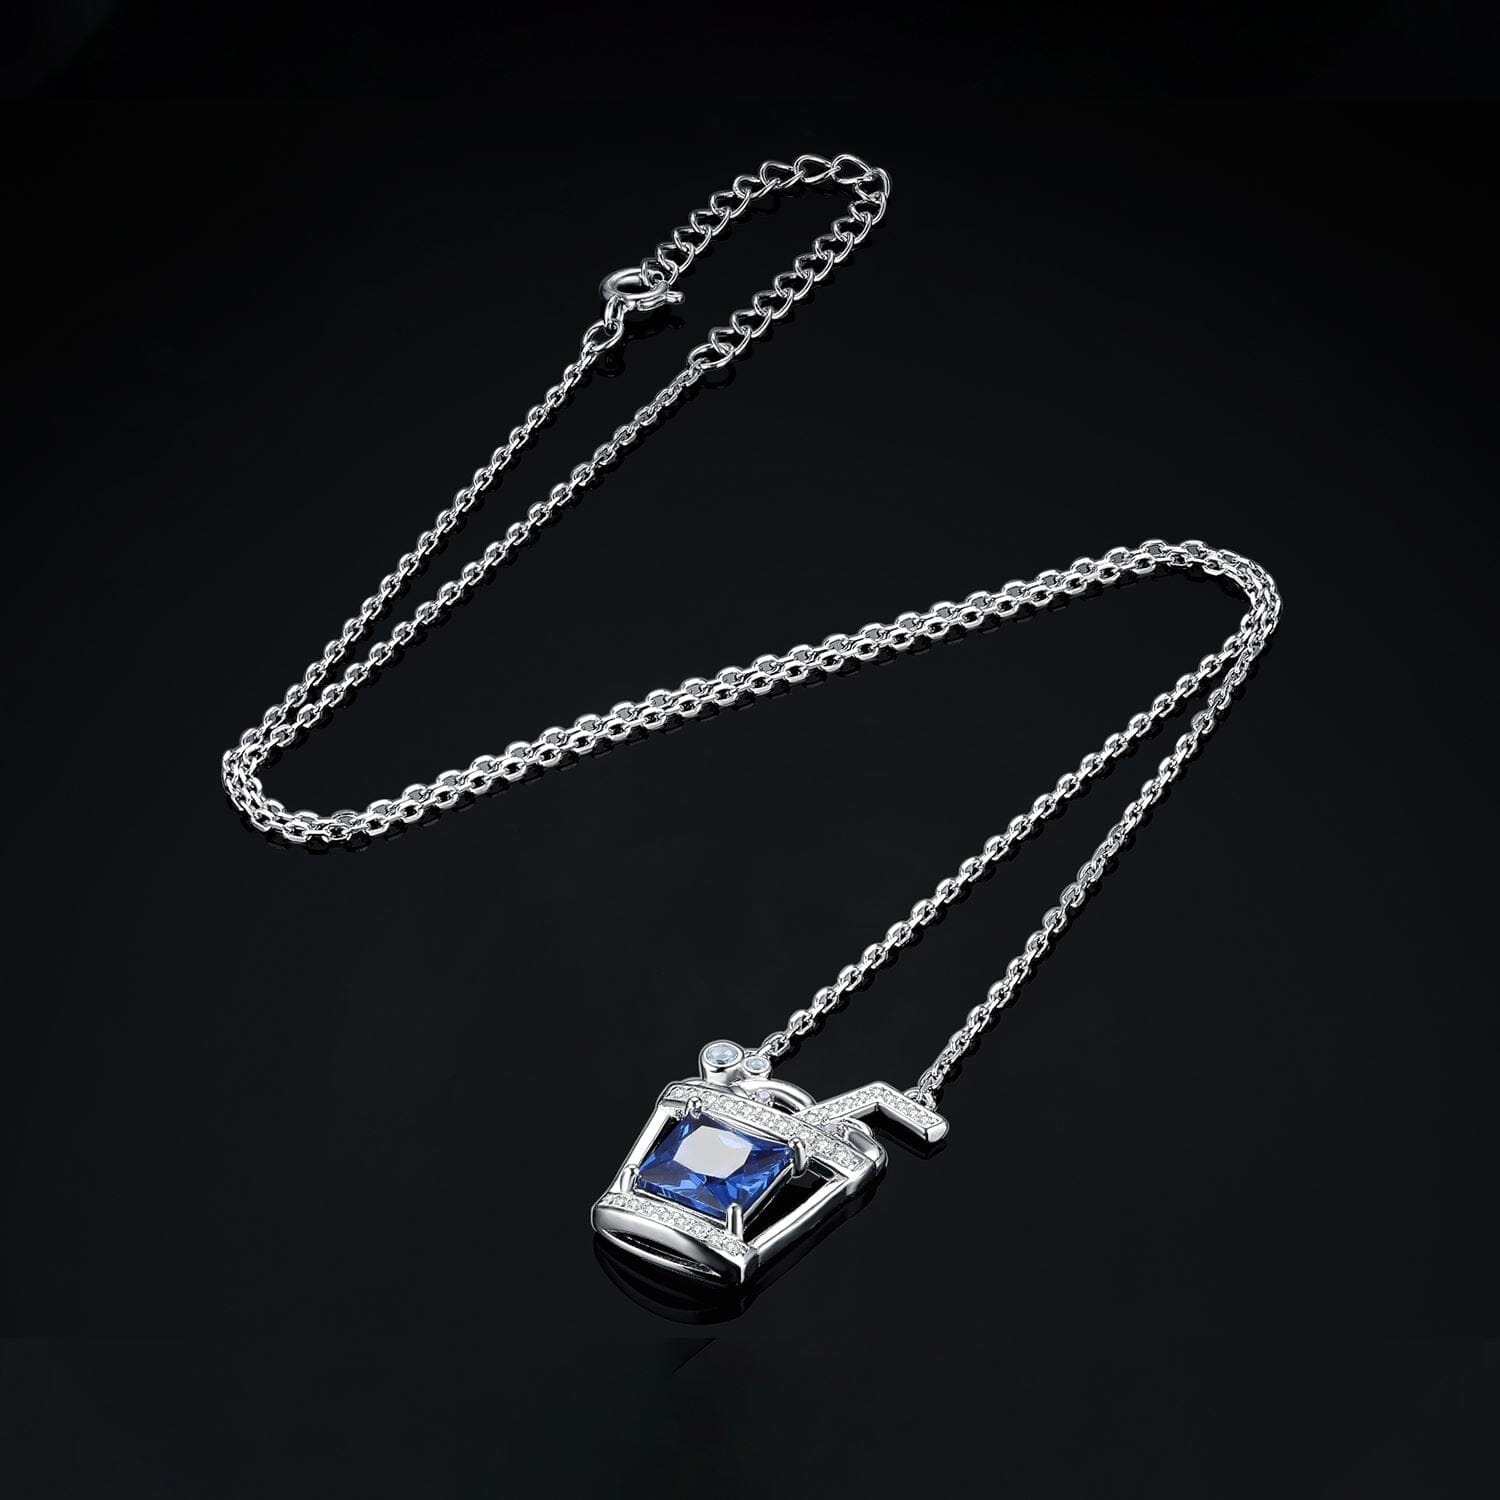 Fashion Ice Cold Drink 3.1ct Blue Sapphire Gemstone Necklace - 925 Sterling SilverNecklace